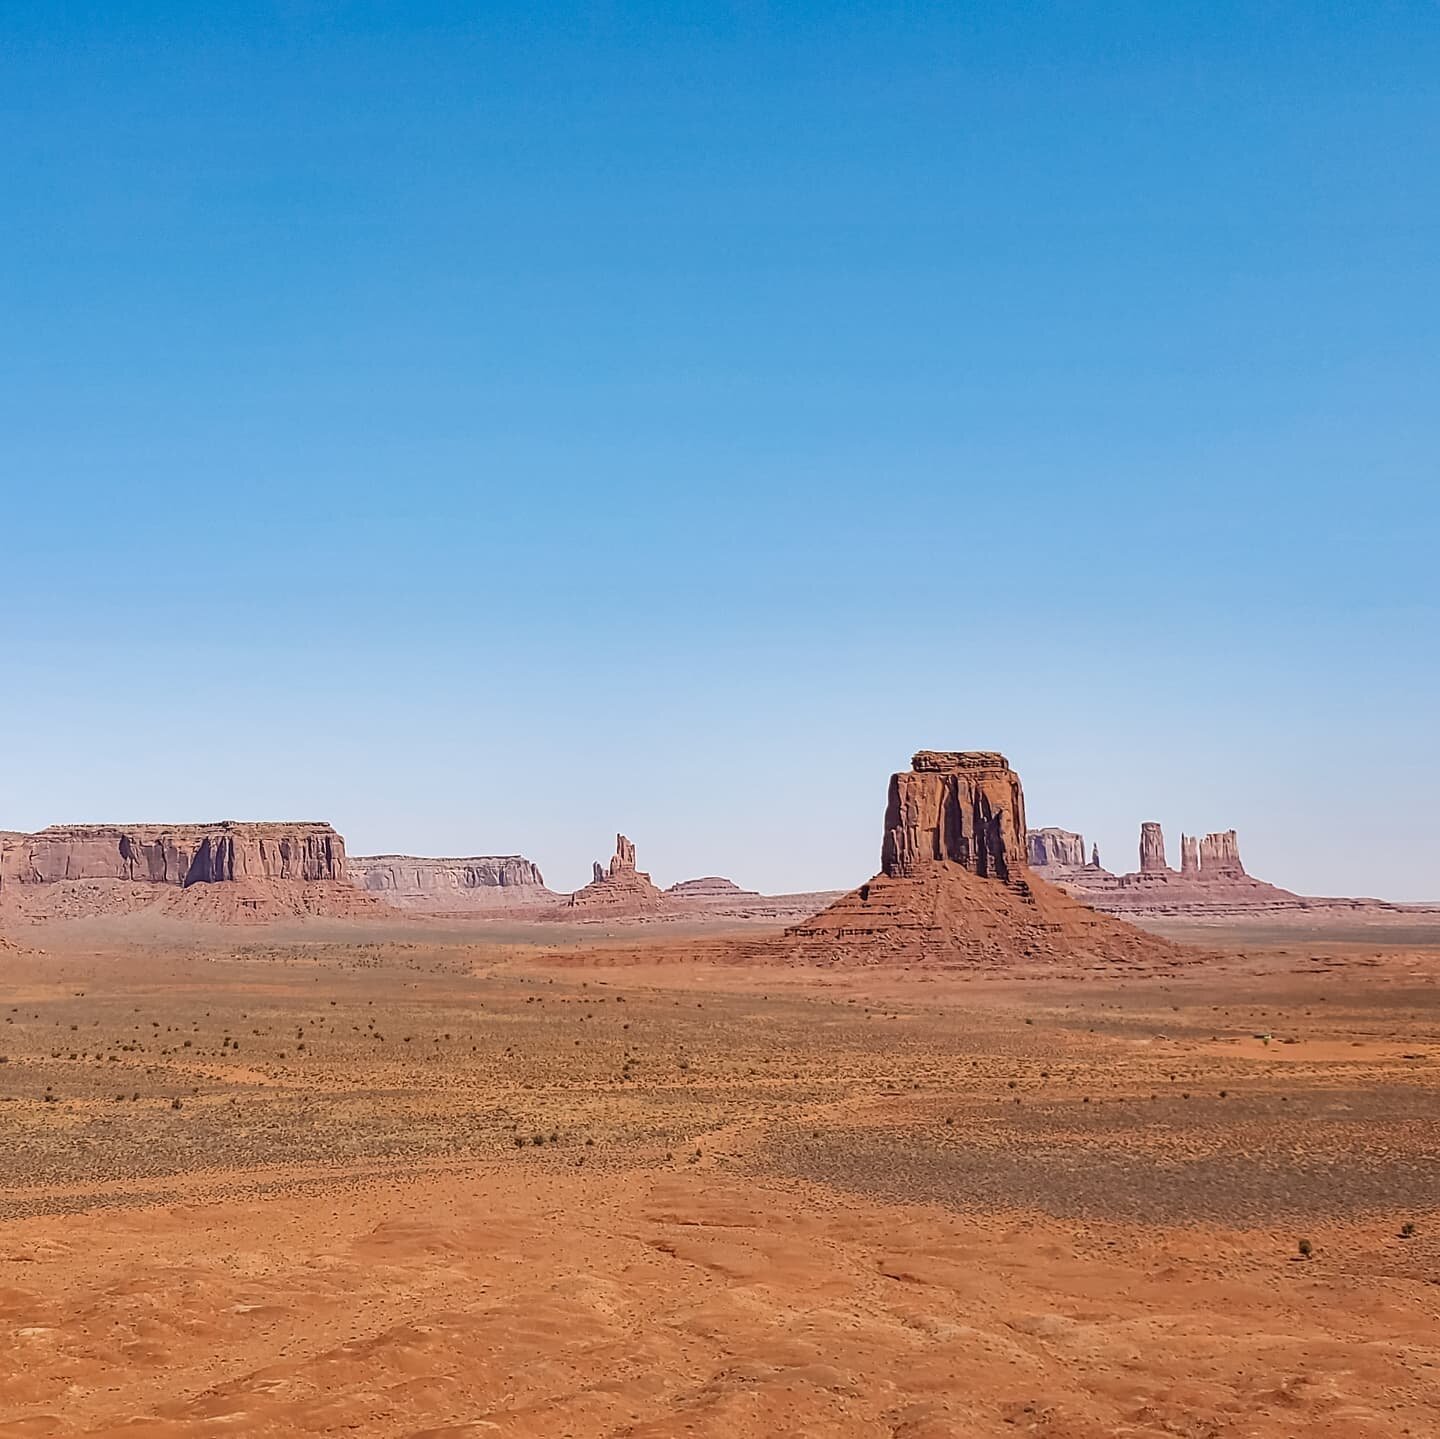 What you need to know about visiting Monument Valley right now (save and share)
 
After being closed for the past 16 months, popular Navajo Nation Tribal Parks destinations like the Four Corners Monument, Antelope Canyon, and Monument Valley are now 